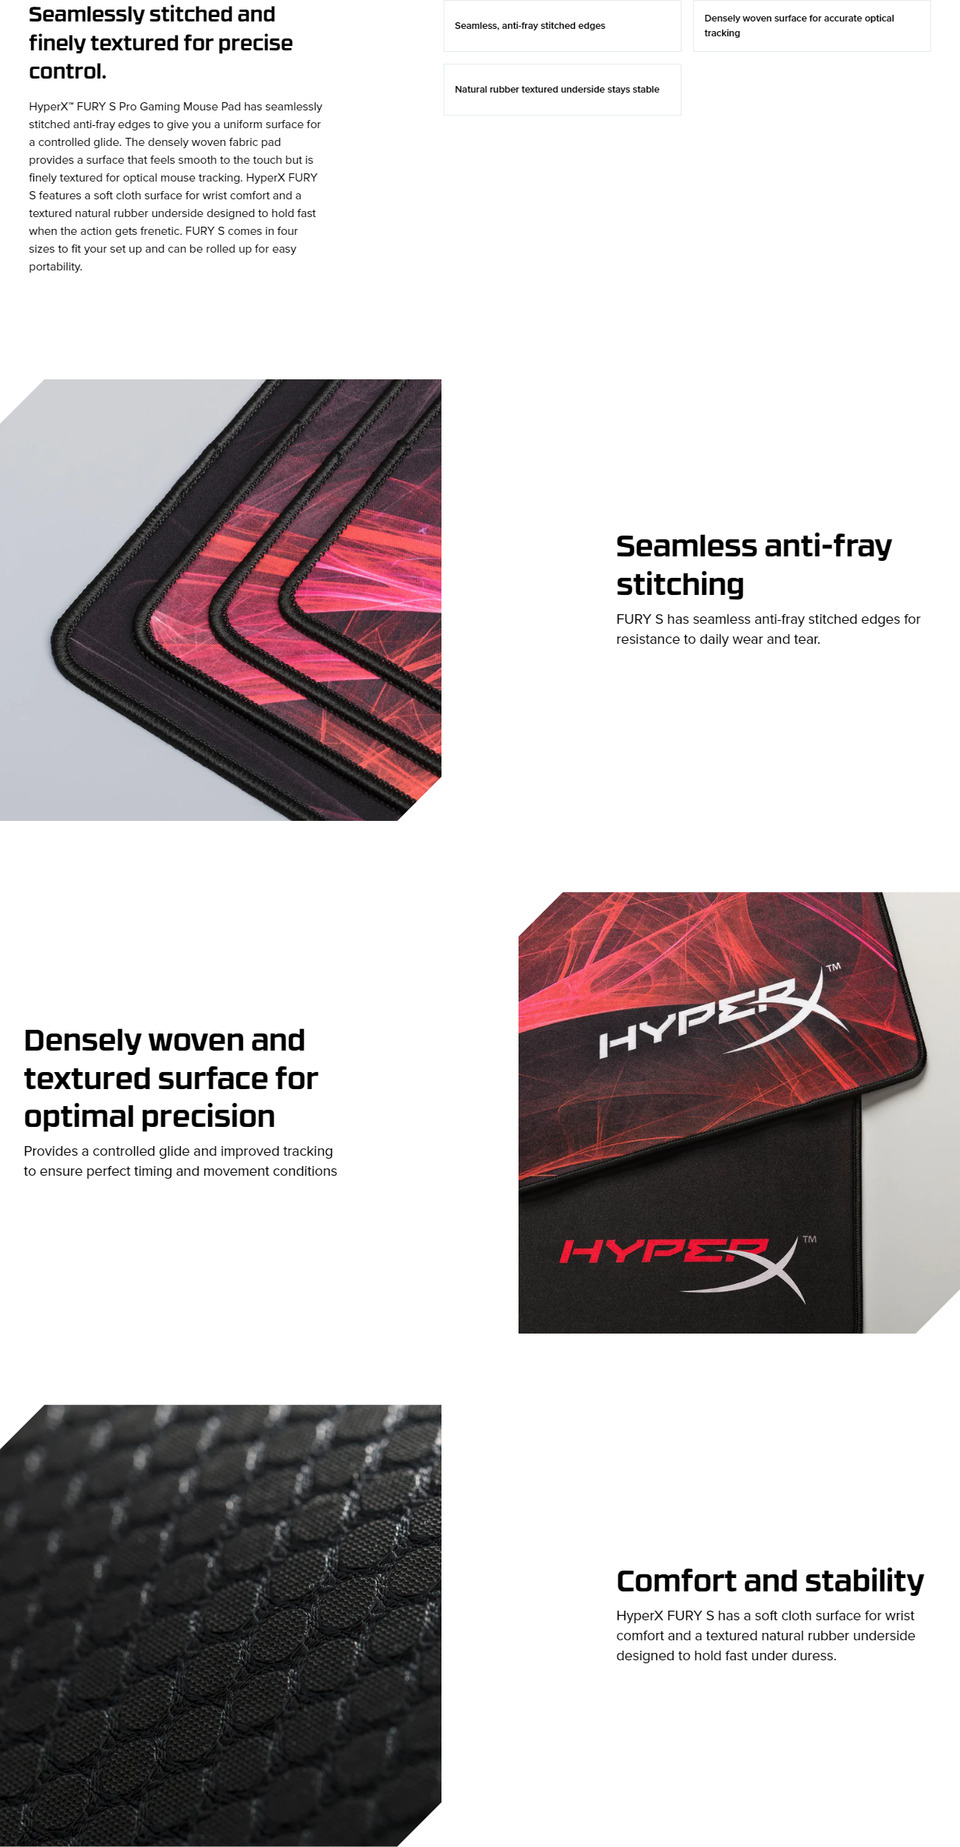 hyperx fury s pro stitched gaming mouse pad - large 4p4f9aa